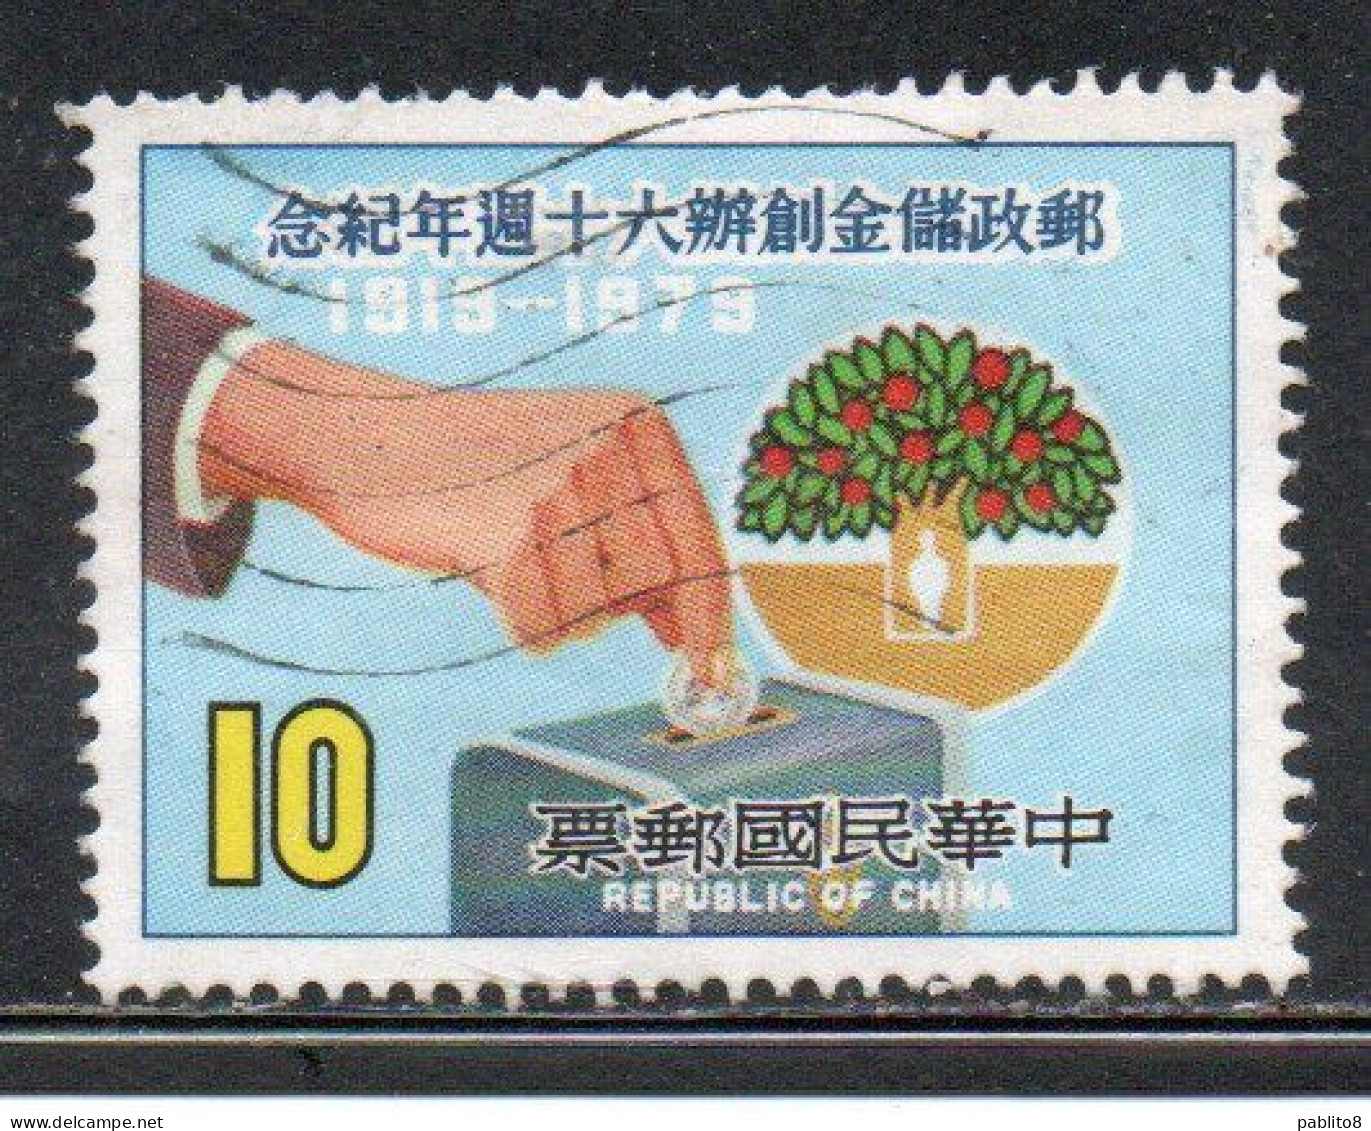 CHINA REPUBLIC CINA TAIWAN FORMOSA 1979 POSTAL SAVINGS HAND PUTTING COIN IN BANK 10$ USED USATO OBLITERE' - Usados